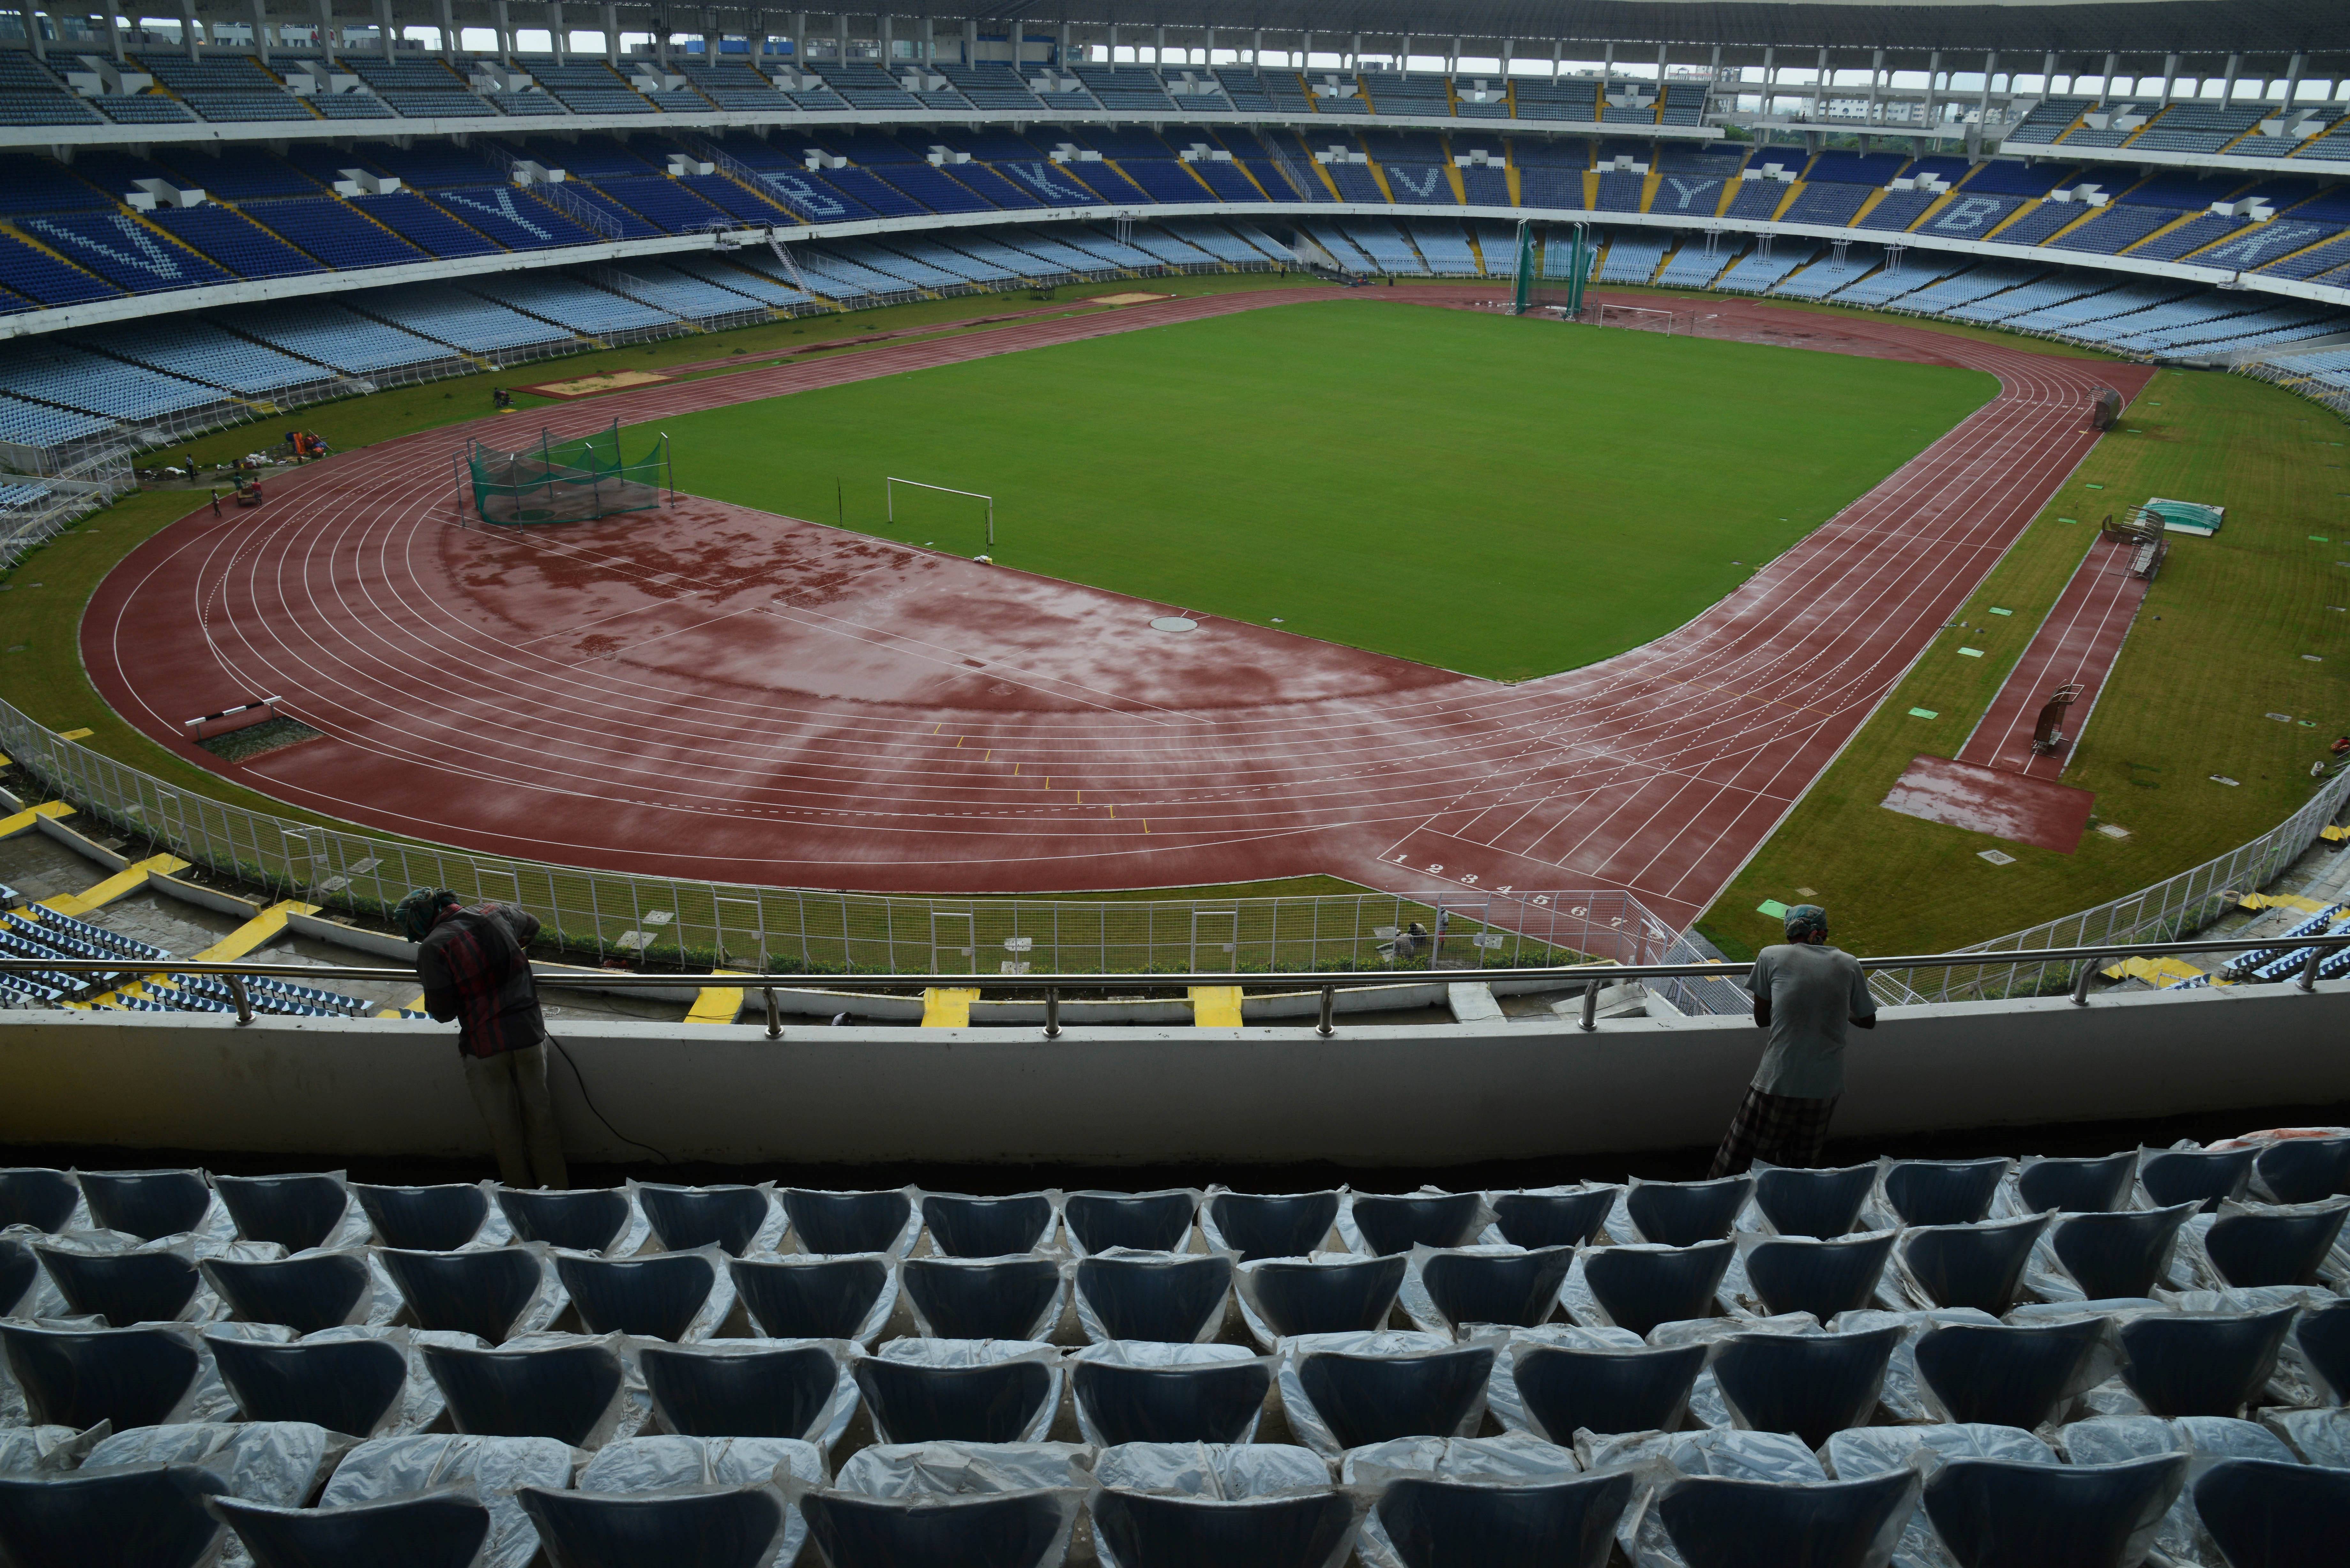 Indian labourers work at the Vivekananda Yuba Bharati Krirangan as part of renovation work in Kolkata on August 8, 2017.  
The iconic Vivekananda Yuba Bharati Krirangan, popularly known as Salt Lake Stadium, in Kolkata has been named as the venue for the final of the 2017 FIFA U-17 World Cup, which will be held in India from October 6-28. / AFP PHOTO / Dibyangshu SARKAR        (Photo credit should read DIBYANGSHU SARKAR/AFP/Getty Images)